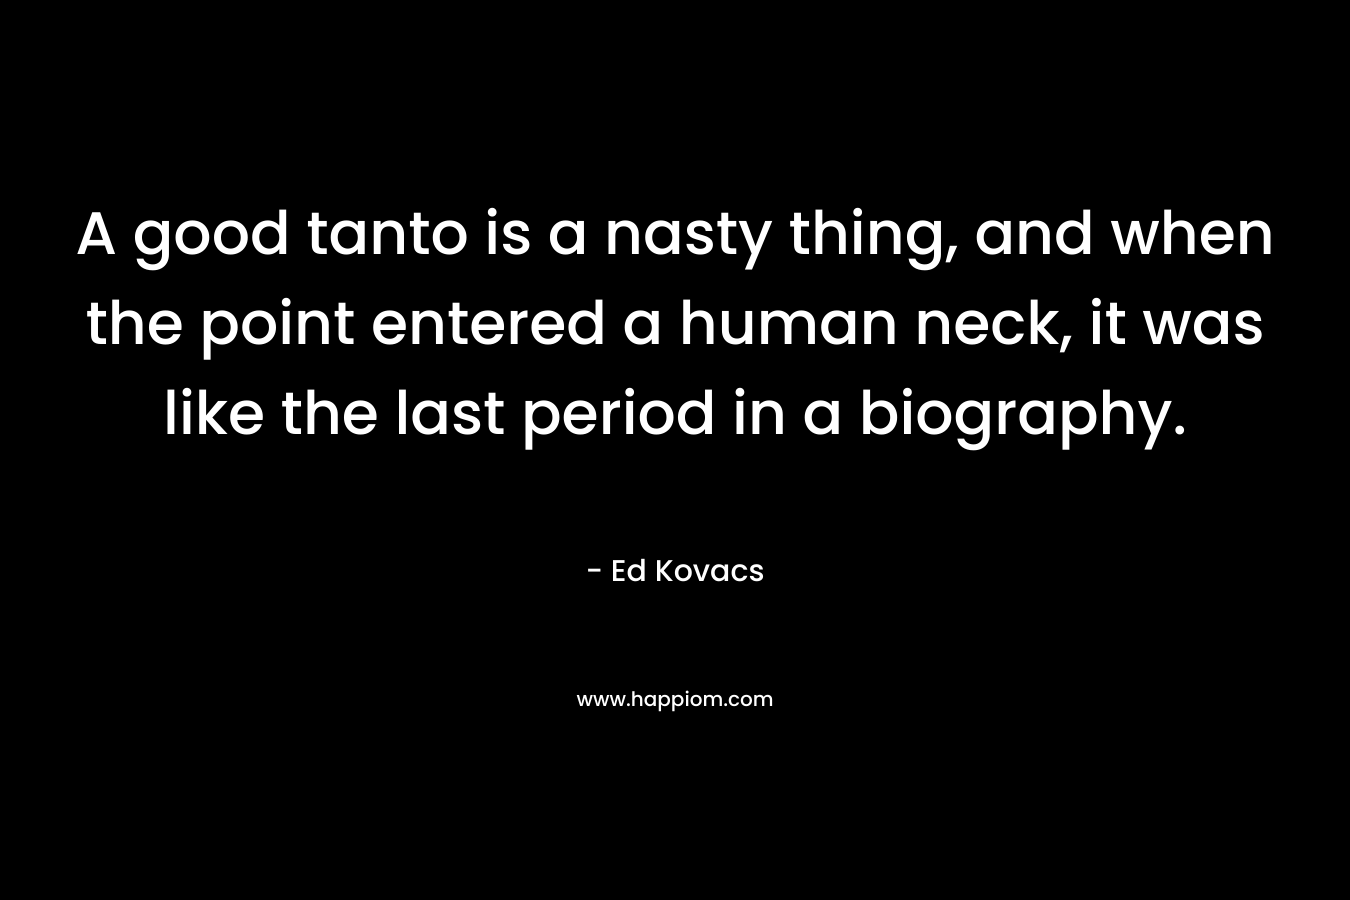 A good tanto is a nasty thing, and when the point entered a human neck, it was like the last period in a biography.